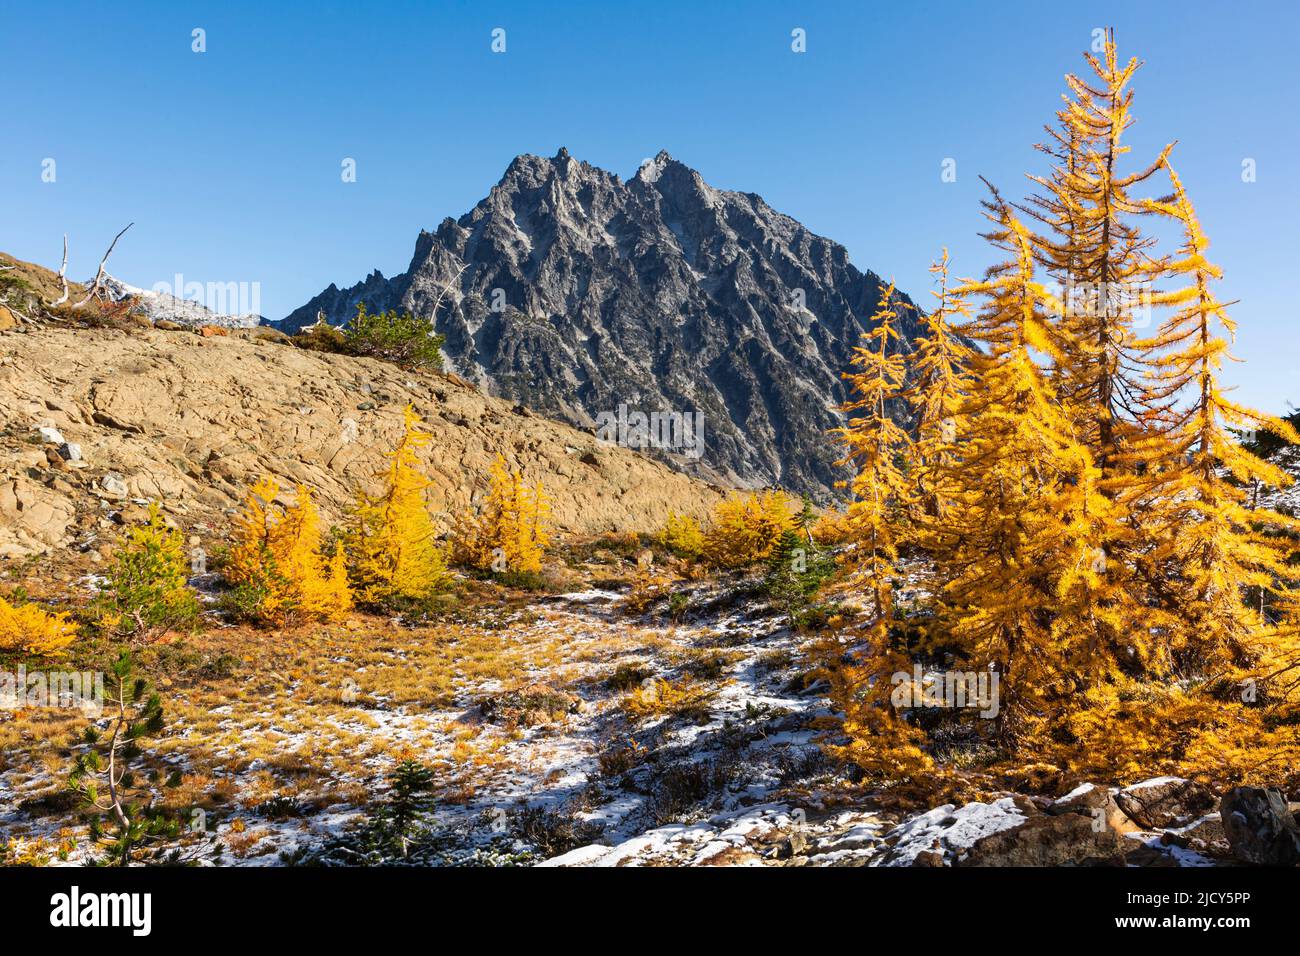 WA21675-00...WASHINGTON - Alpine larch trees and Mount Stuart from Ingall Way in the Alpine Lakes Wilderness area. Stock Photo